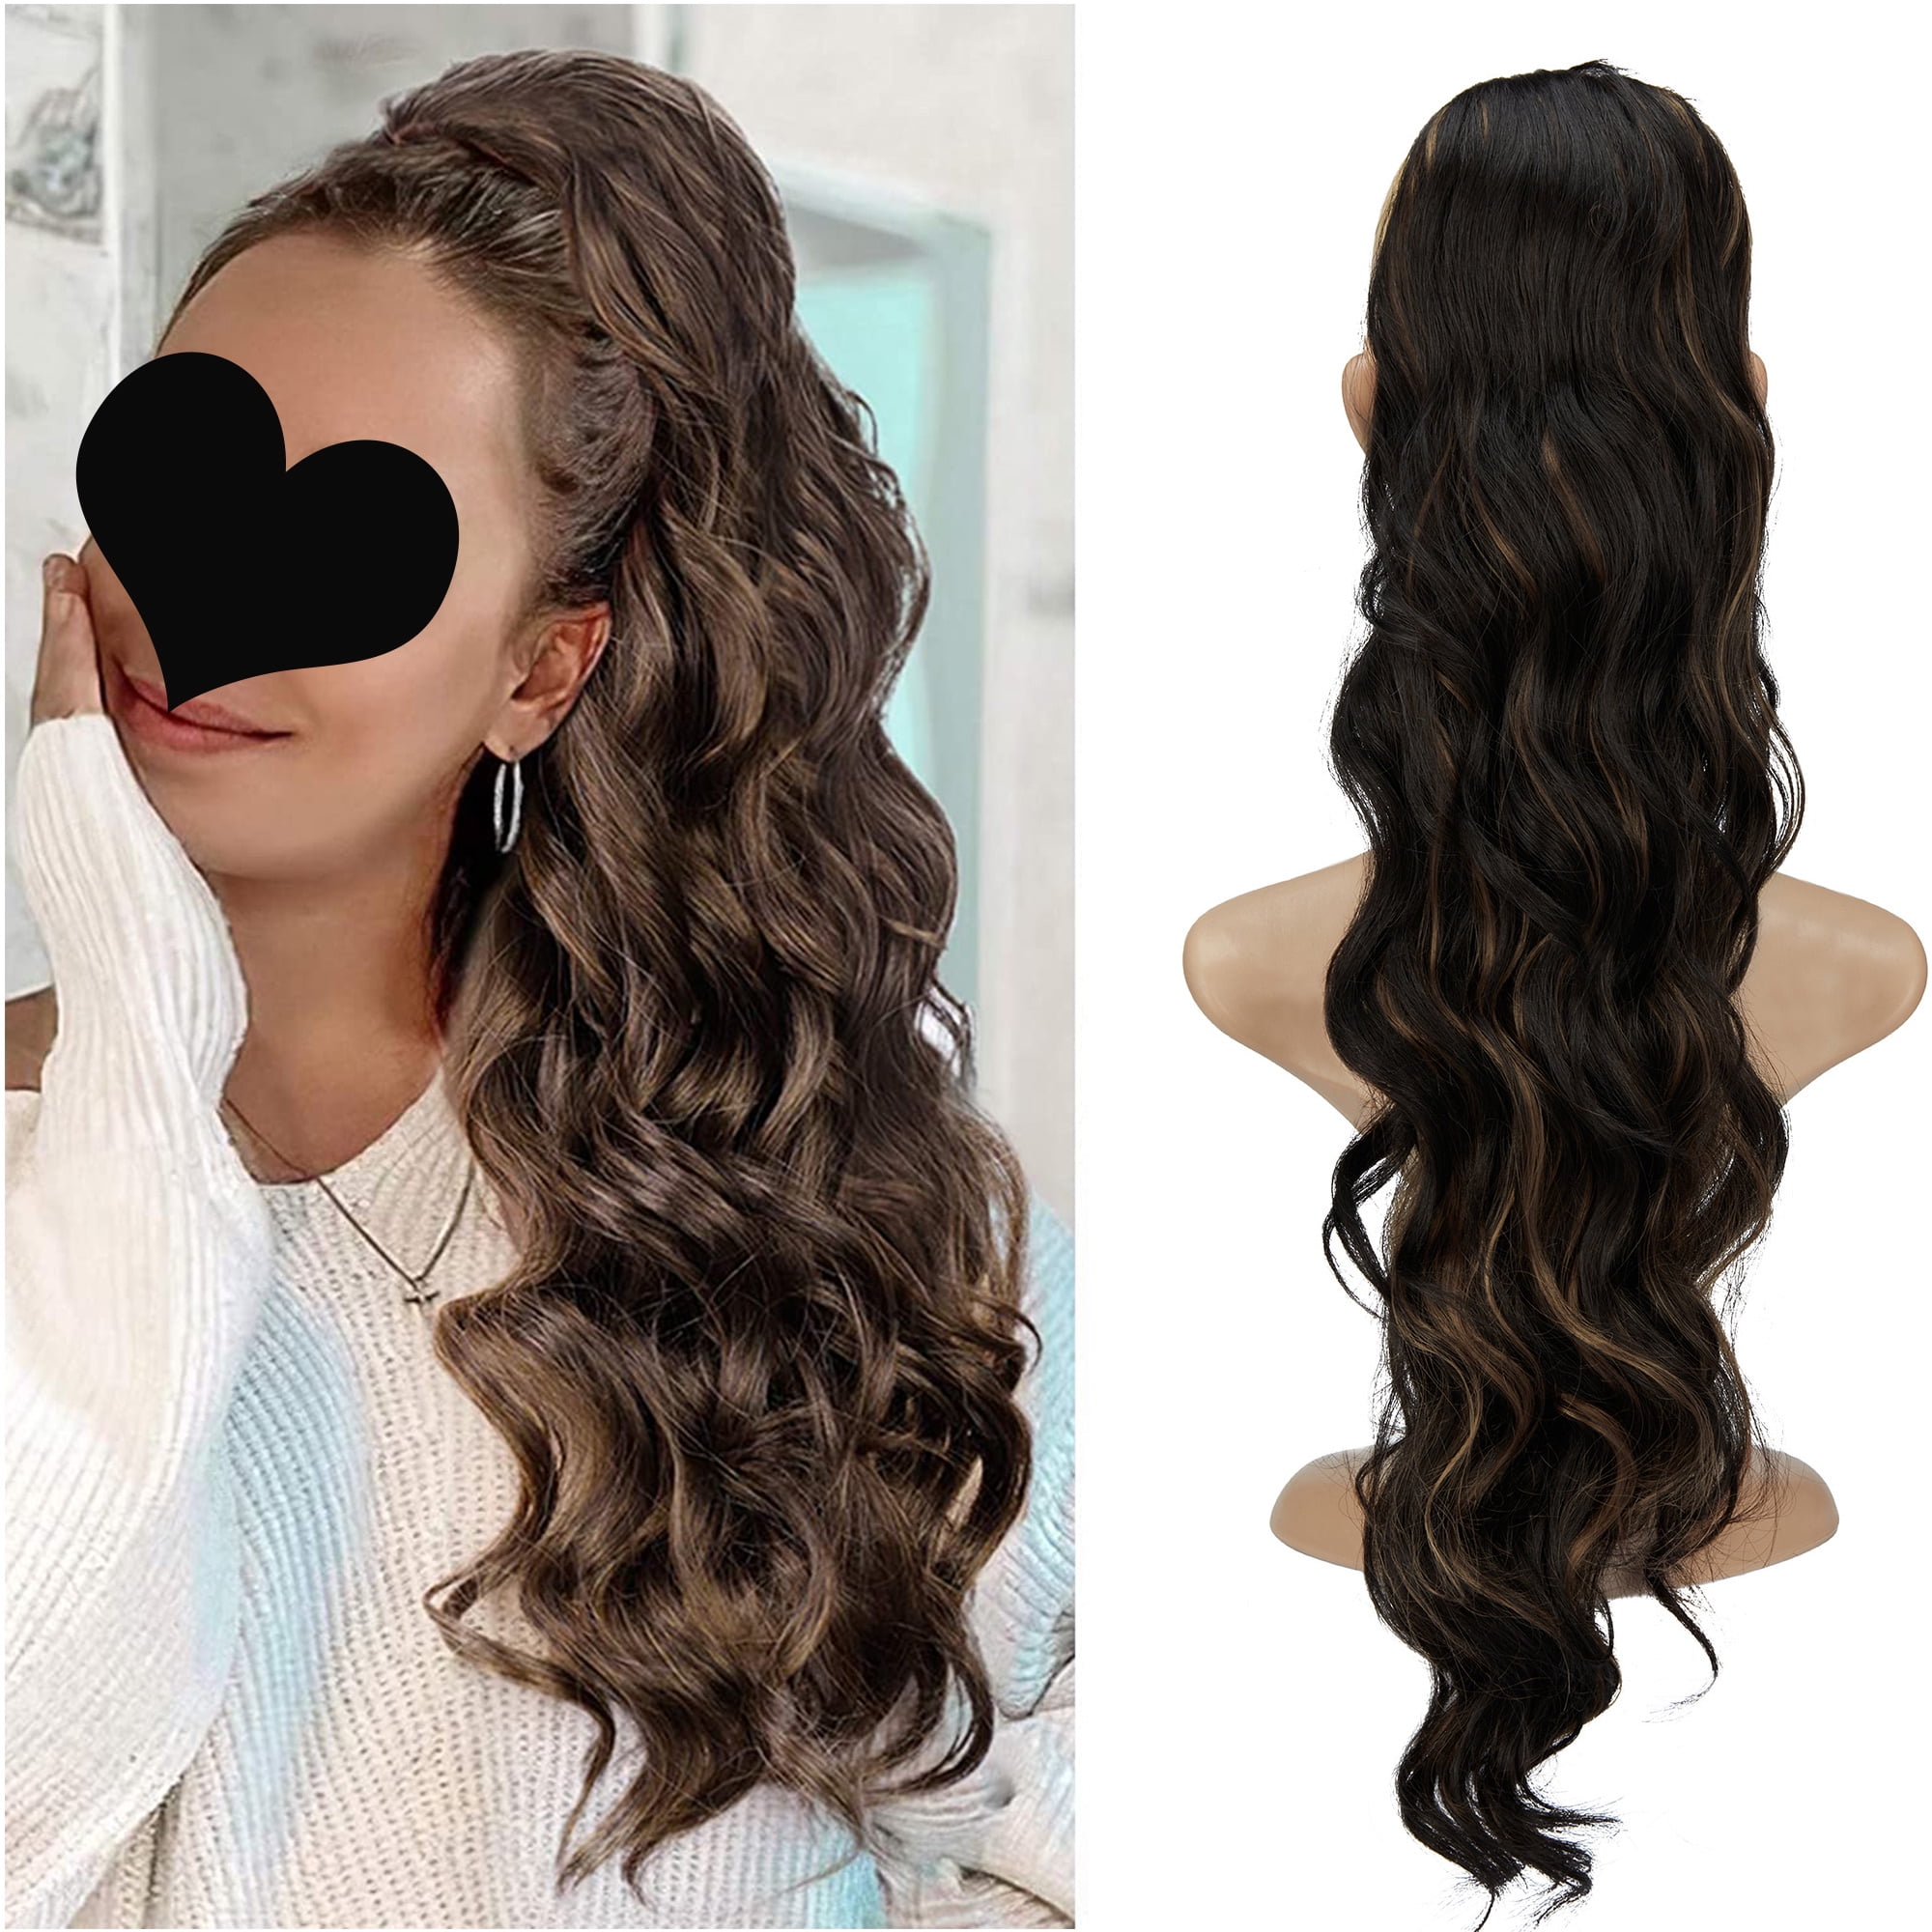 Wave Ponytail Extension Clip in - 24 Inch Long Wavy Curly Clip in